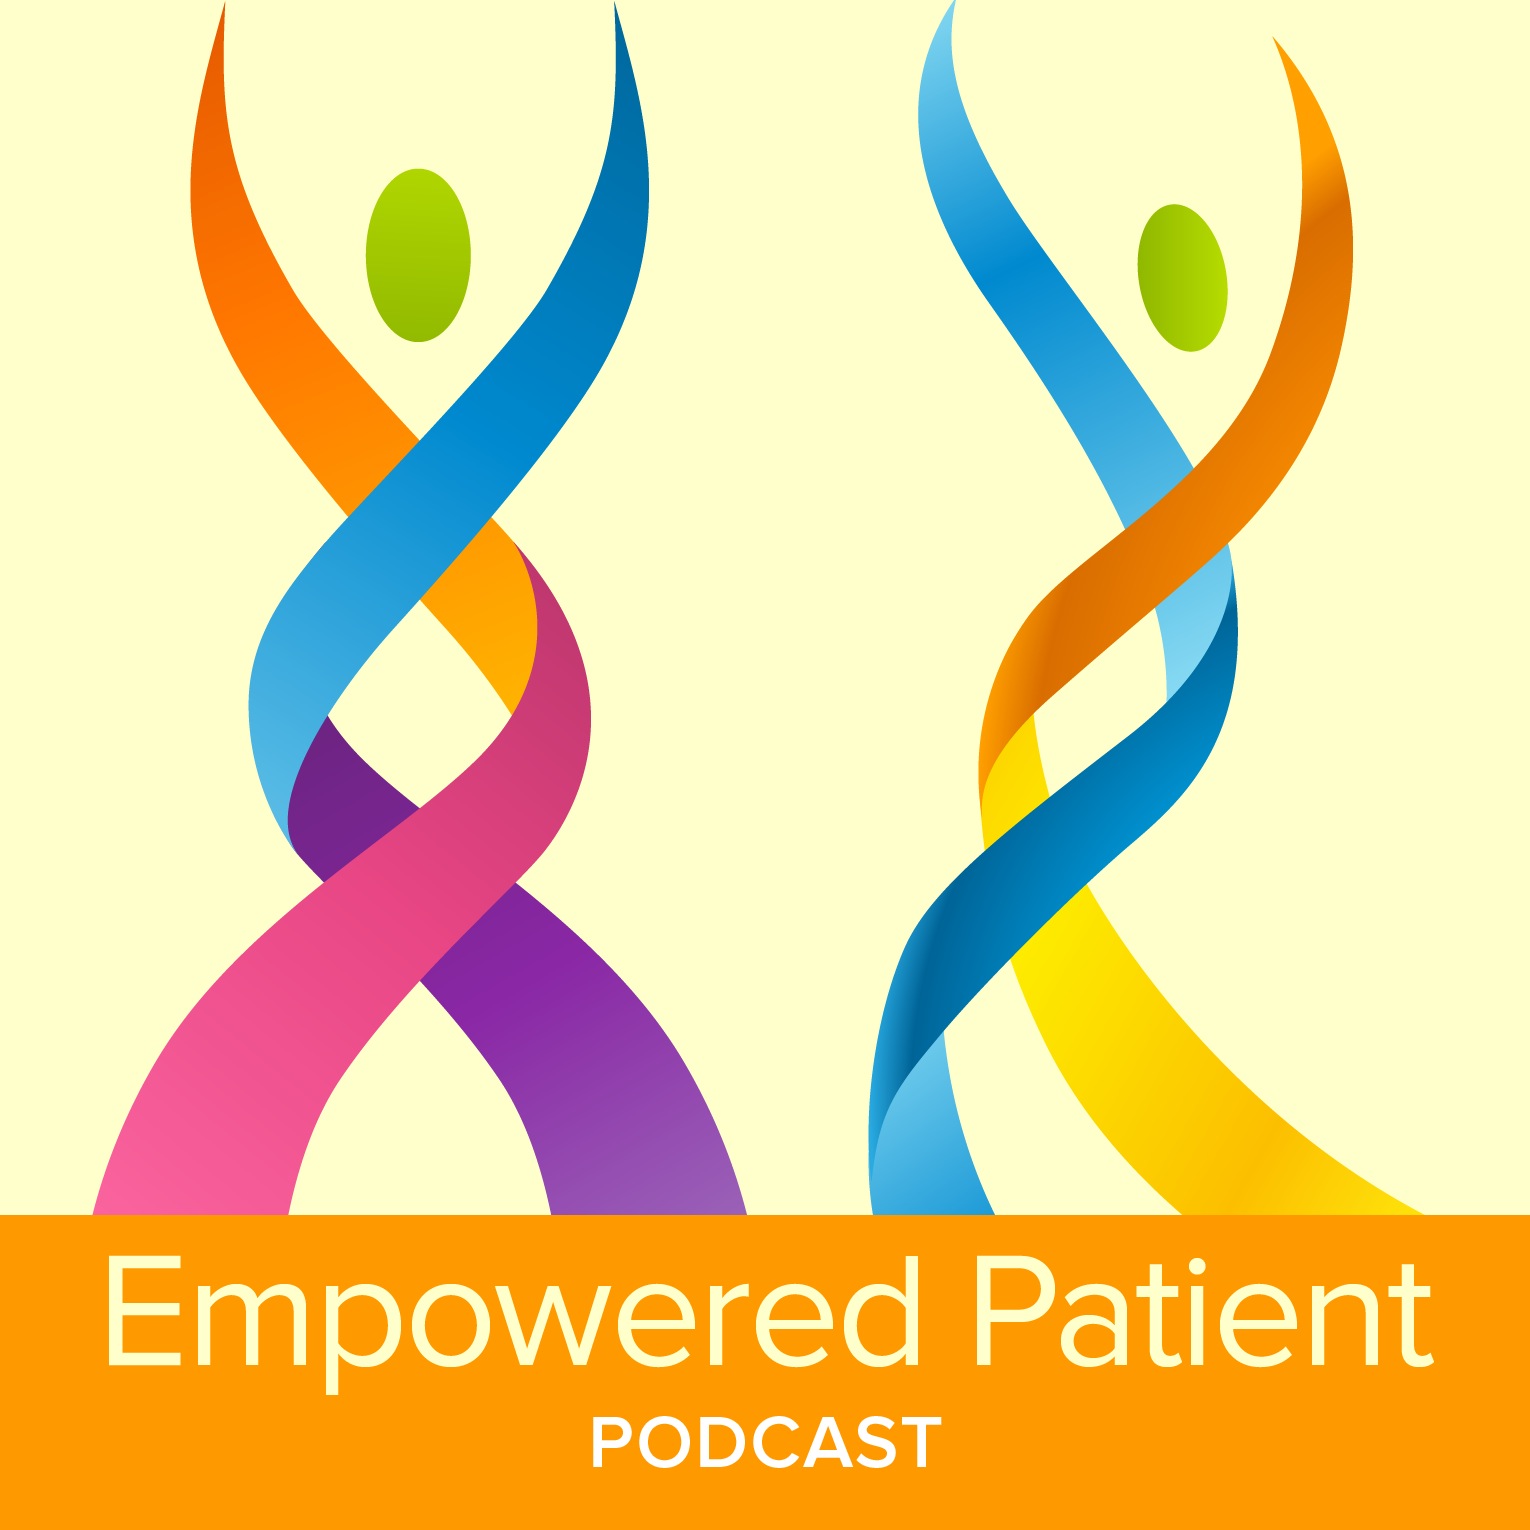 Empowered Patient Podcast: Rare Disease